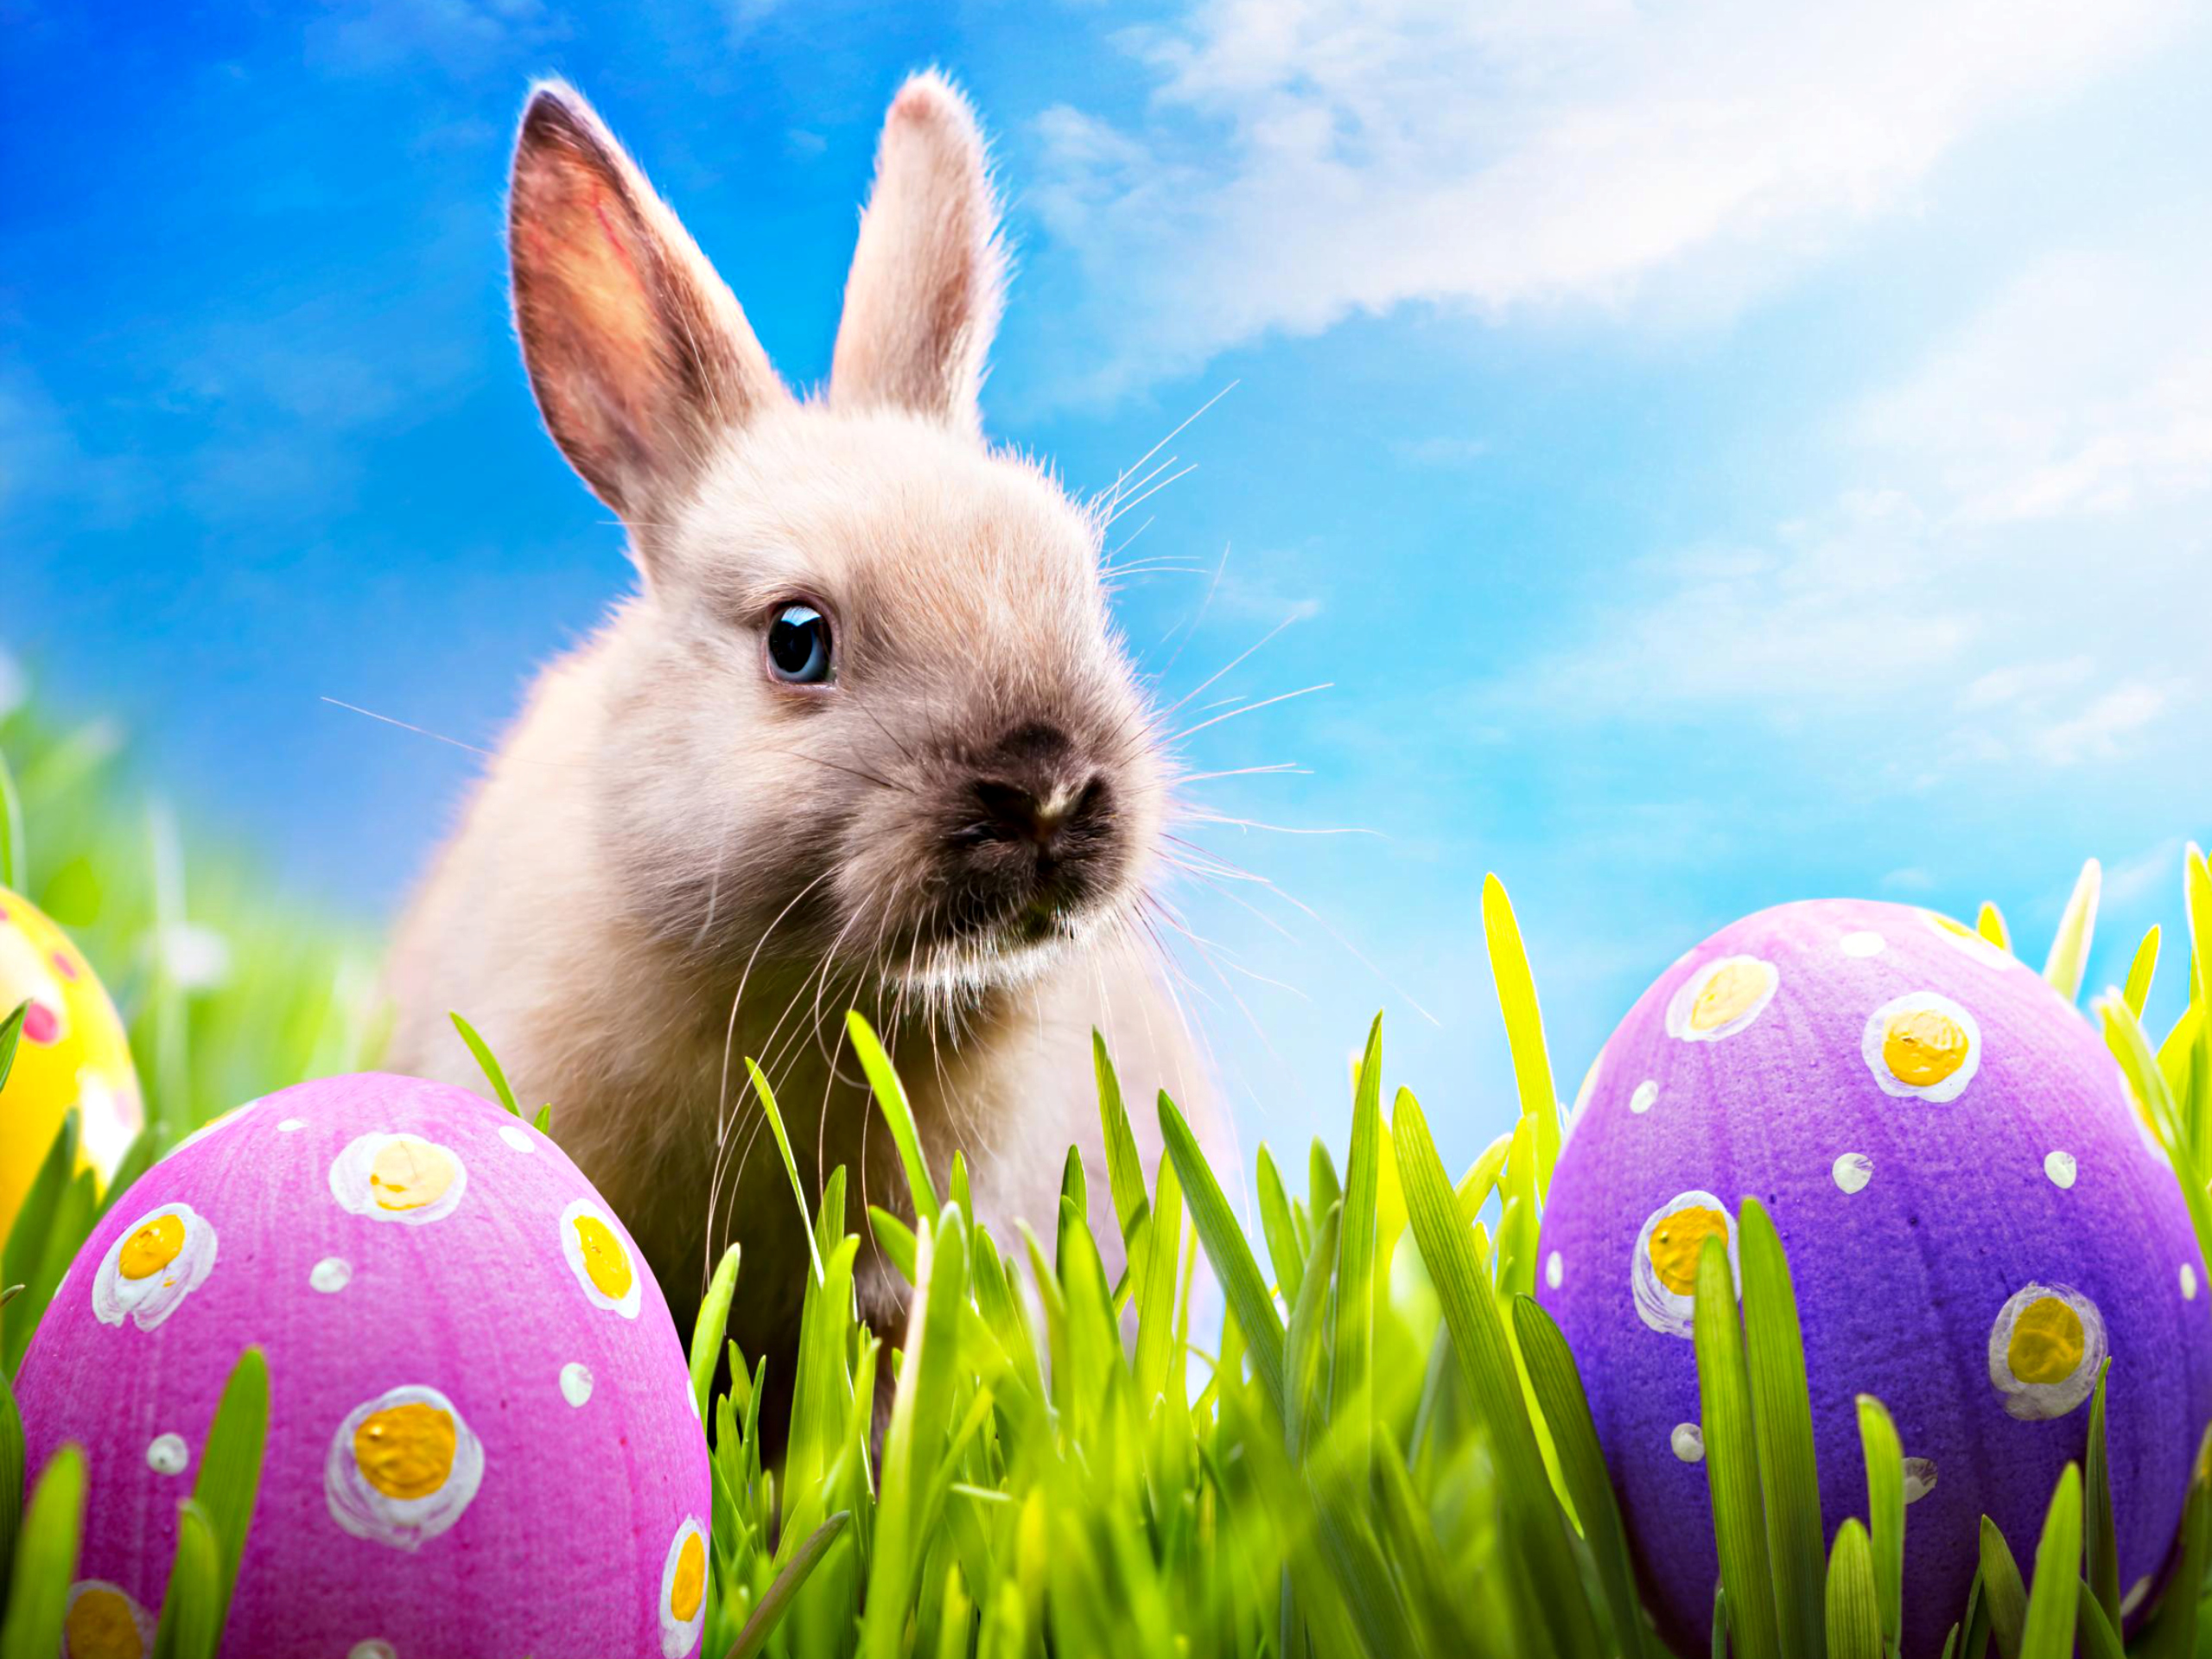 Happy-Easter-happy-easter-all-my-fans-30389589-